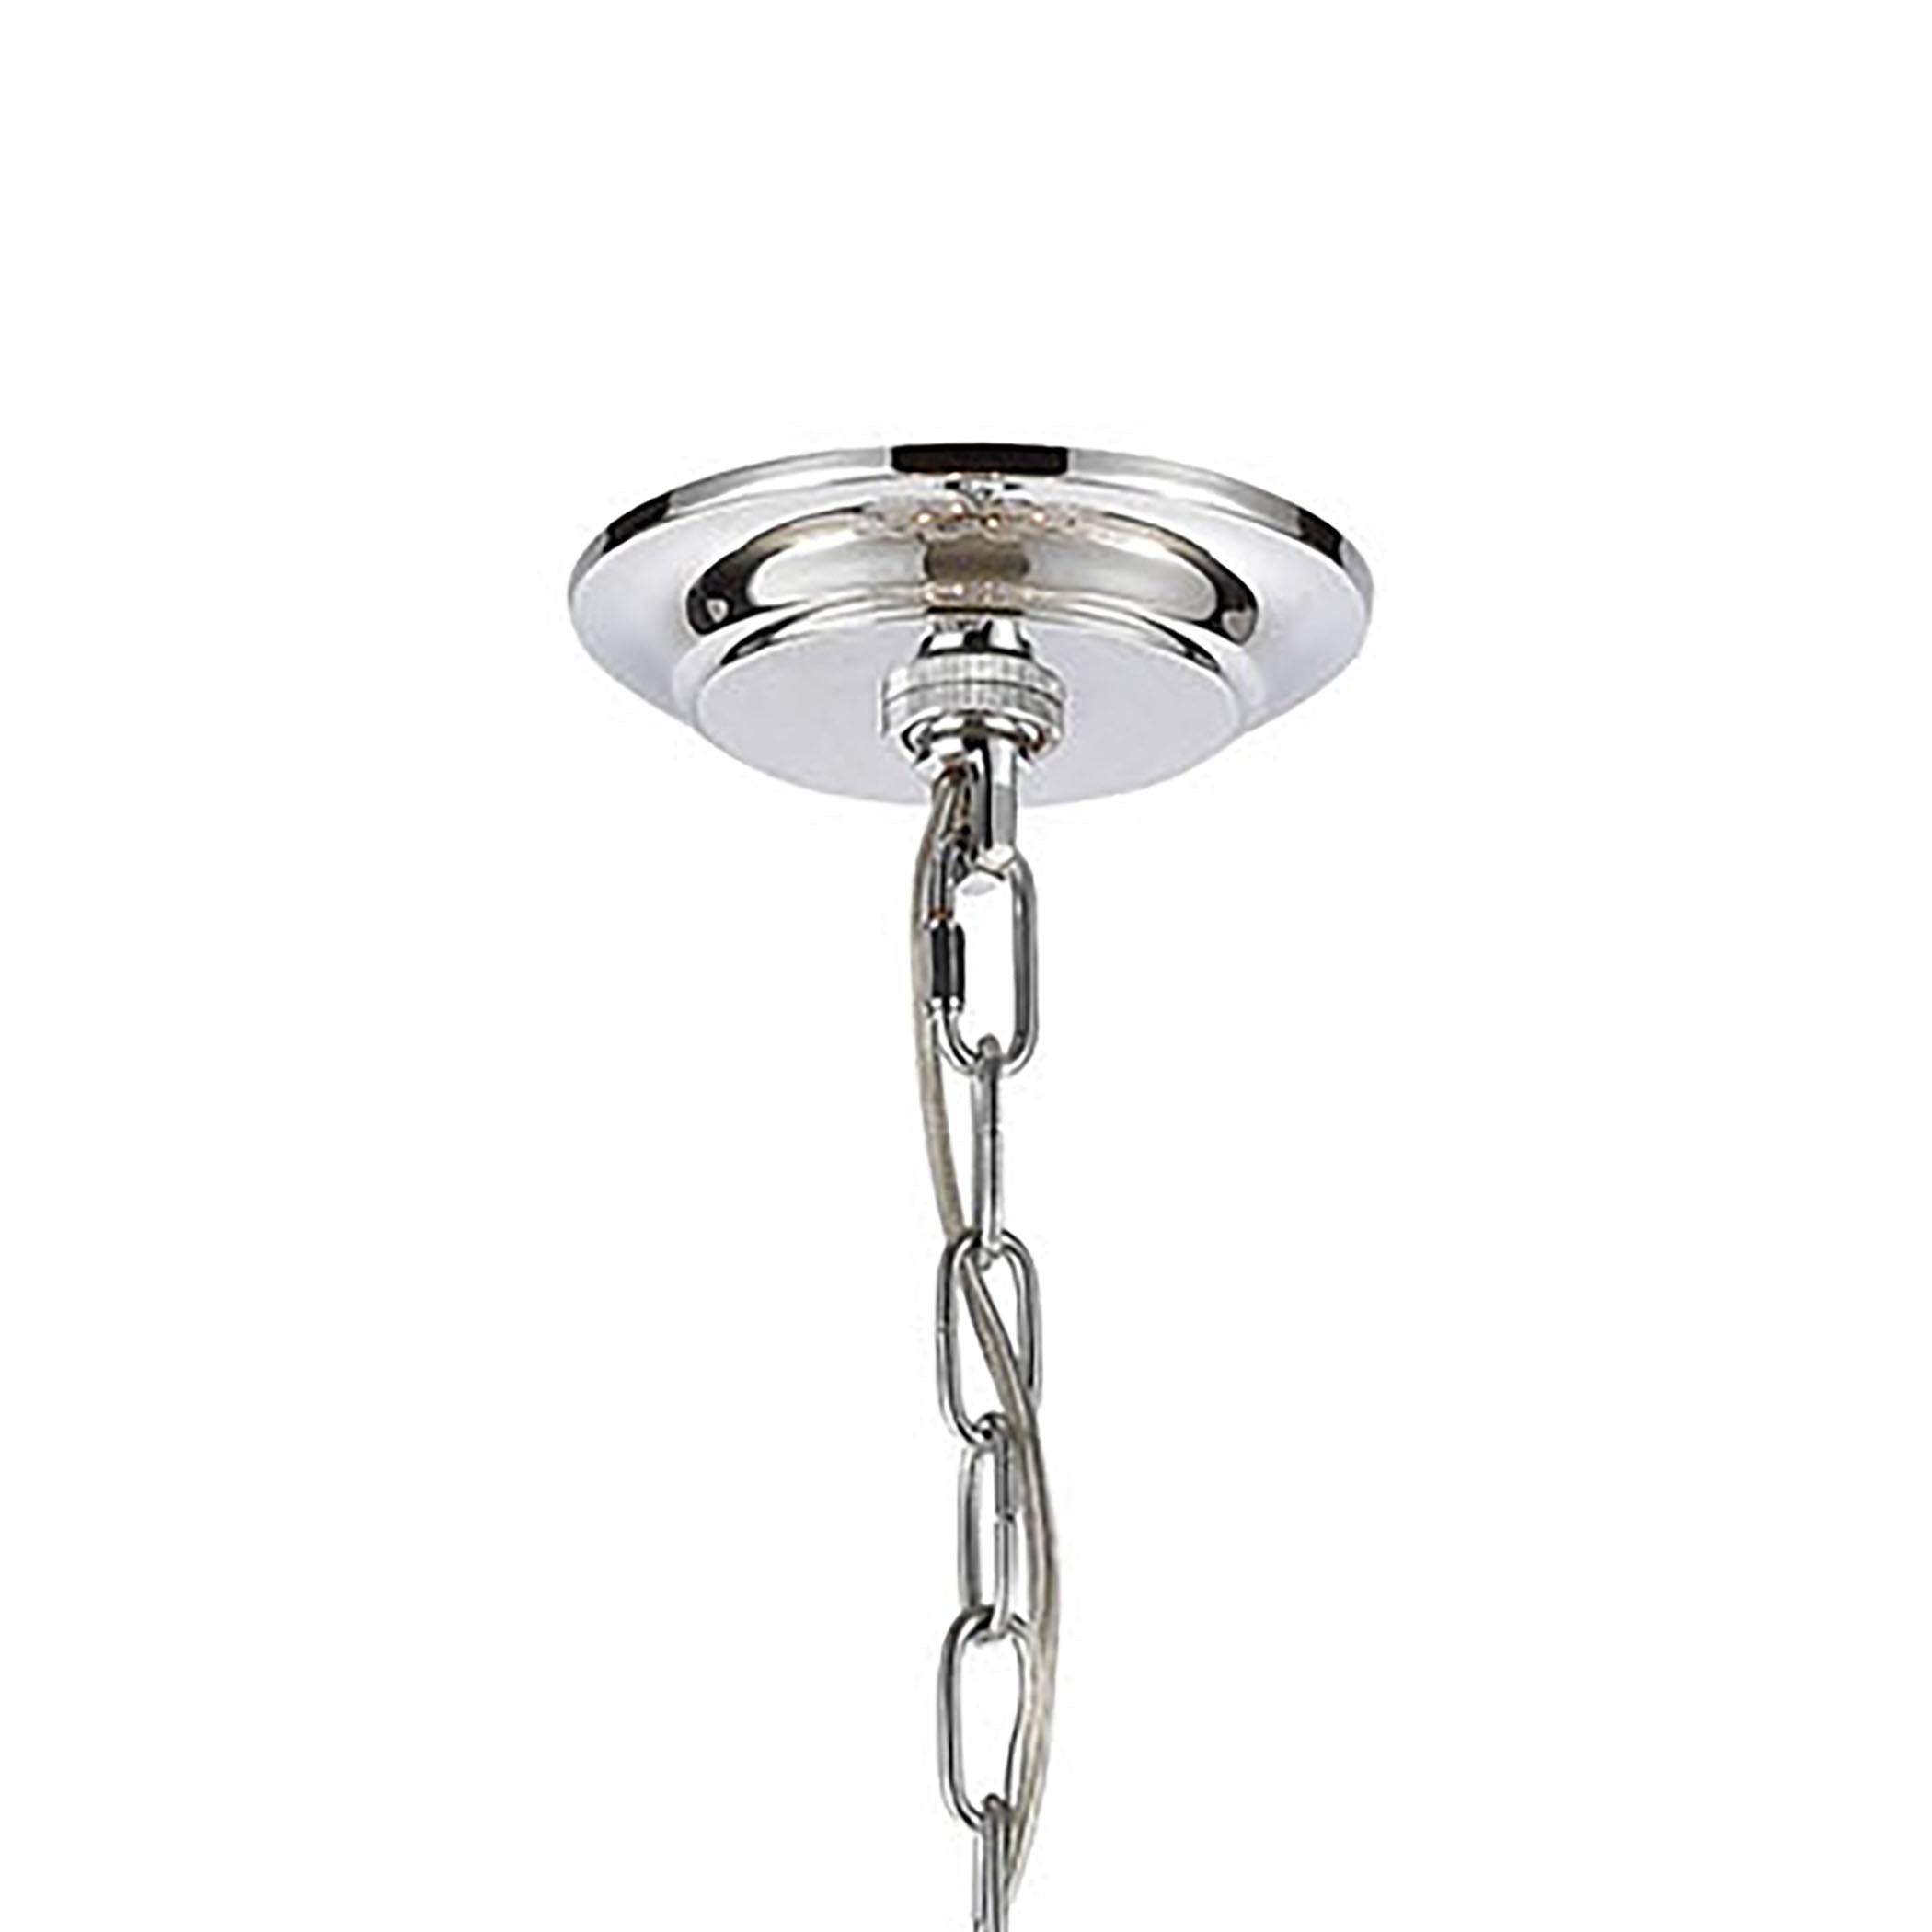 ELK Lighting 32445/9 Frozen Cascade 9-Light Chandelier in Polished Chrome with Clear Textured Glass